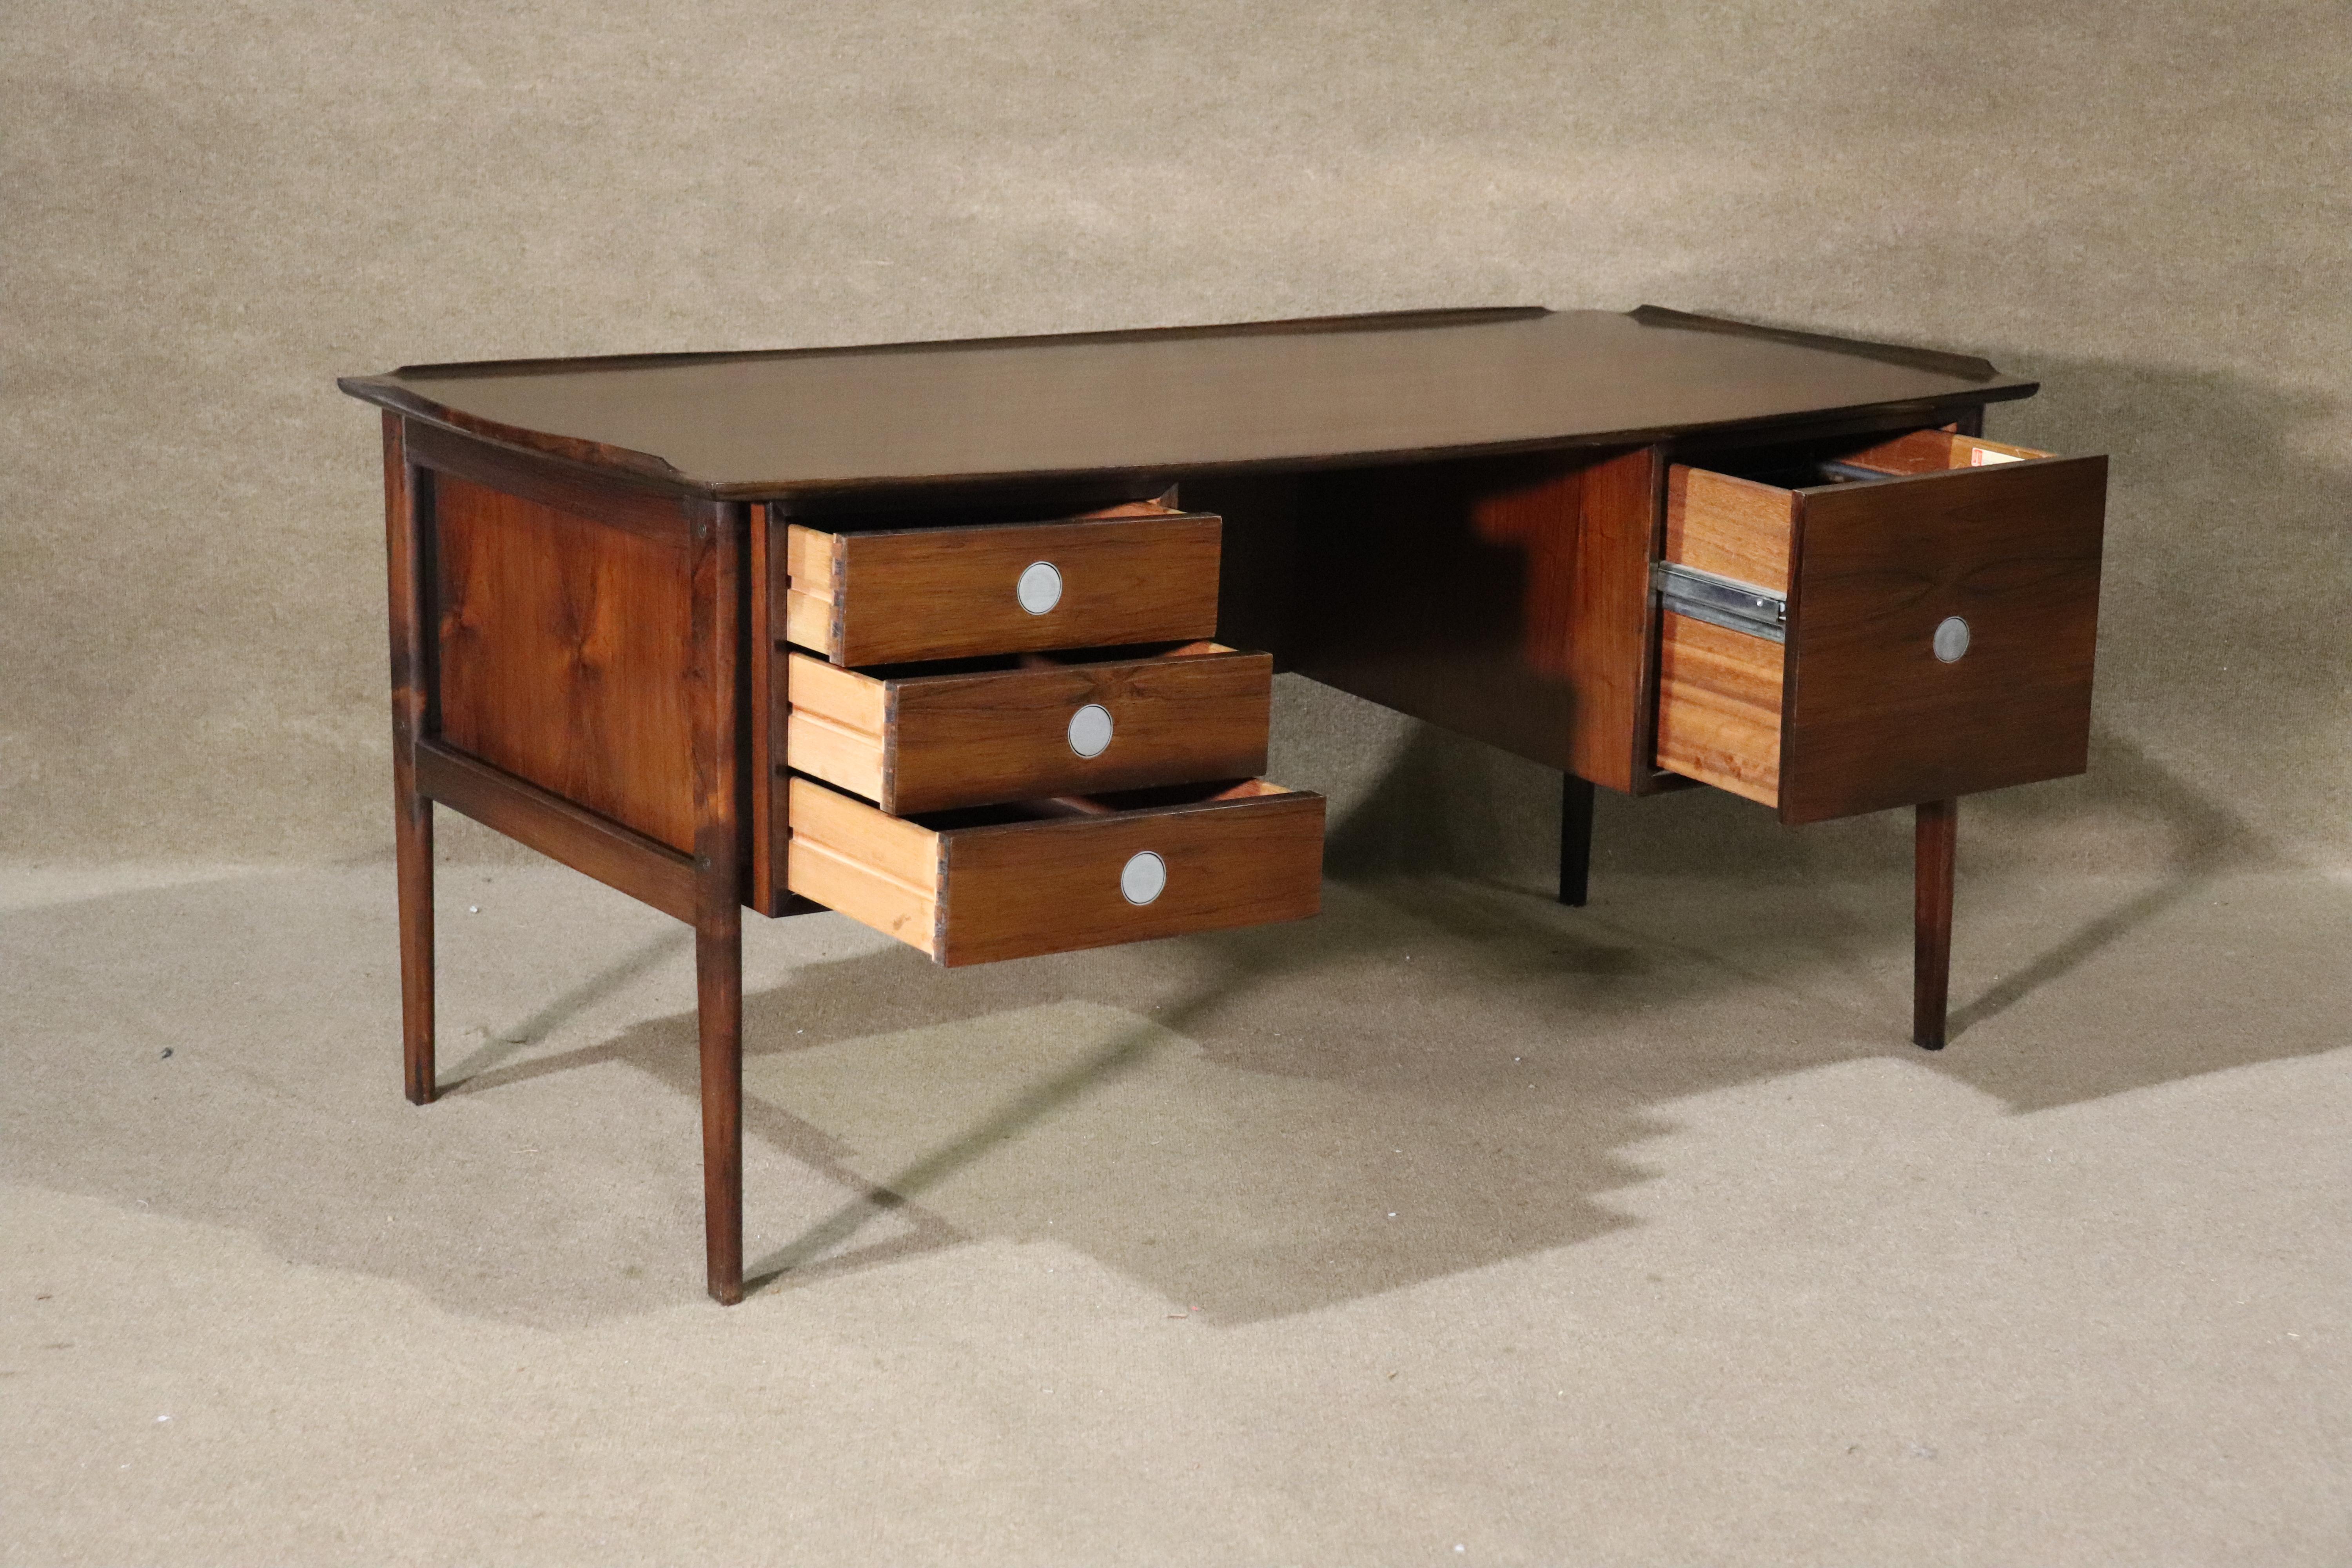 Spectacular Danish desk in rich rosewood grain. Made by Dyrlund Smith, featuring finished back, and hidden aluminum drawer pulls. Unique disc-shaped brass pulls that lay flat when closed and pivot for opening.
Please confirm location NY or NJ